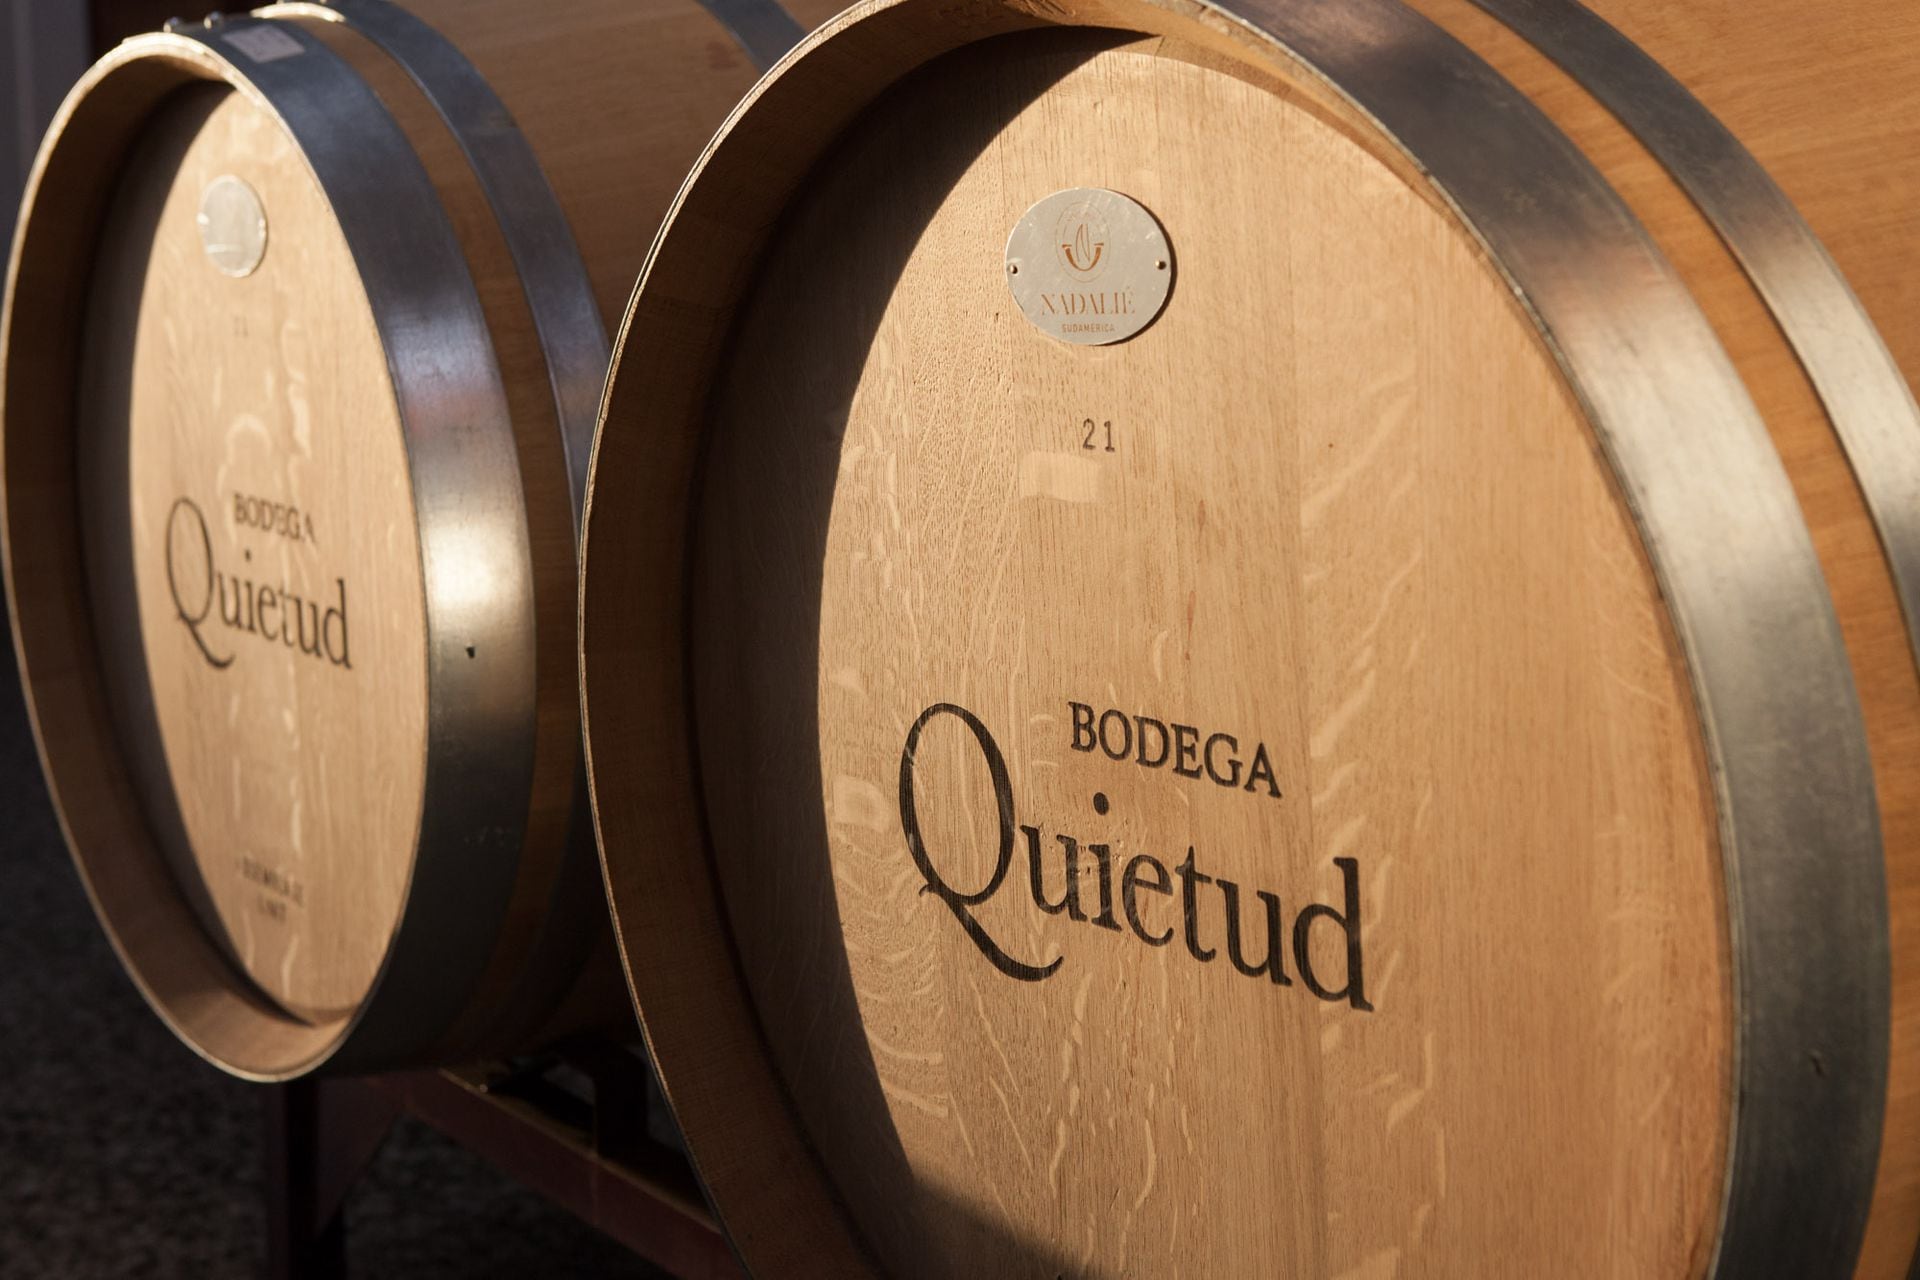 The finest wine is kept in barrels for up to 18 months.  They are the top of the range of its production.